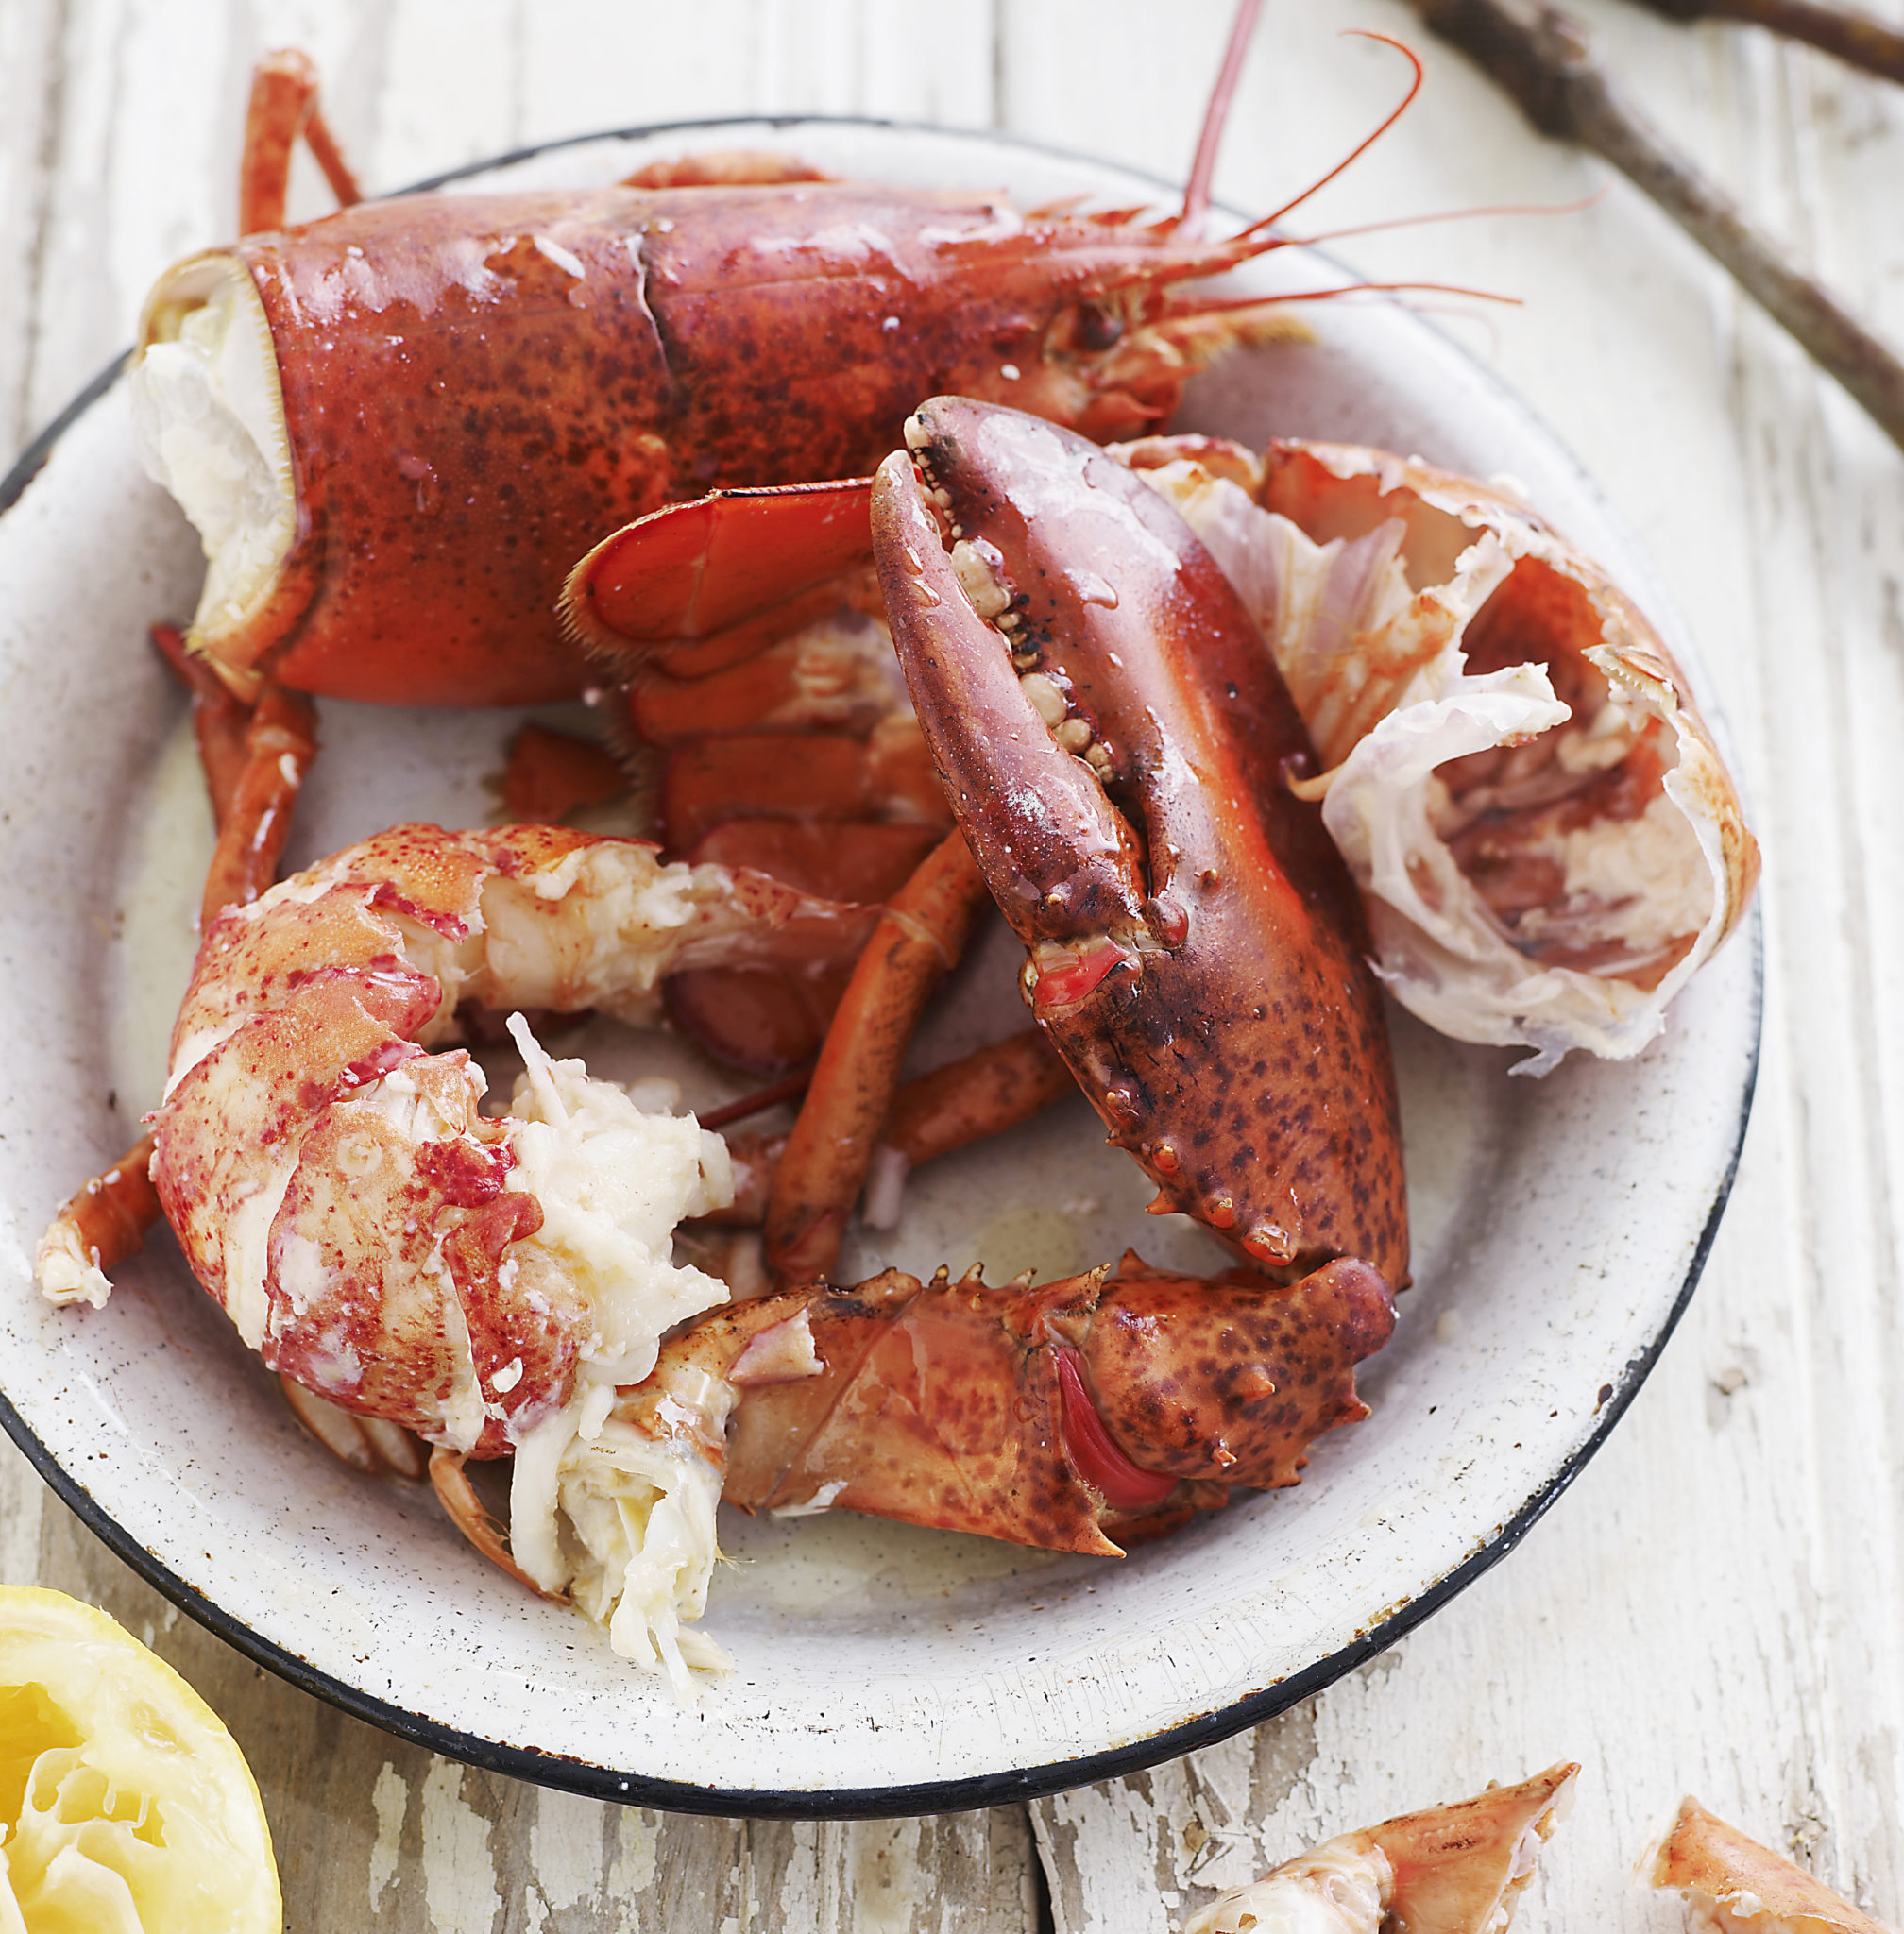 Mastering the four Cs of lobster - catching, choosing, cooking